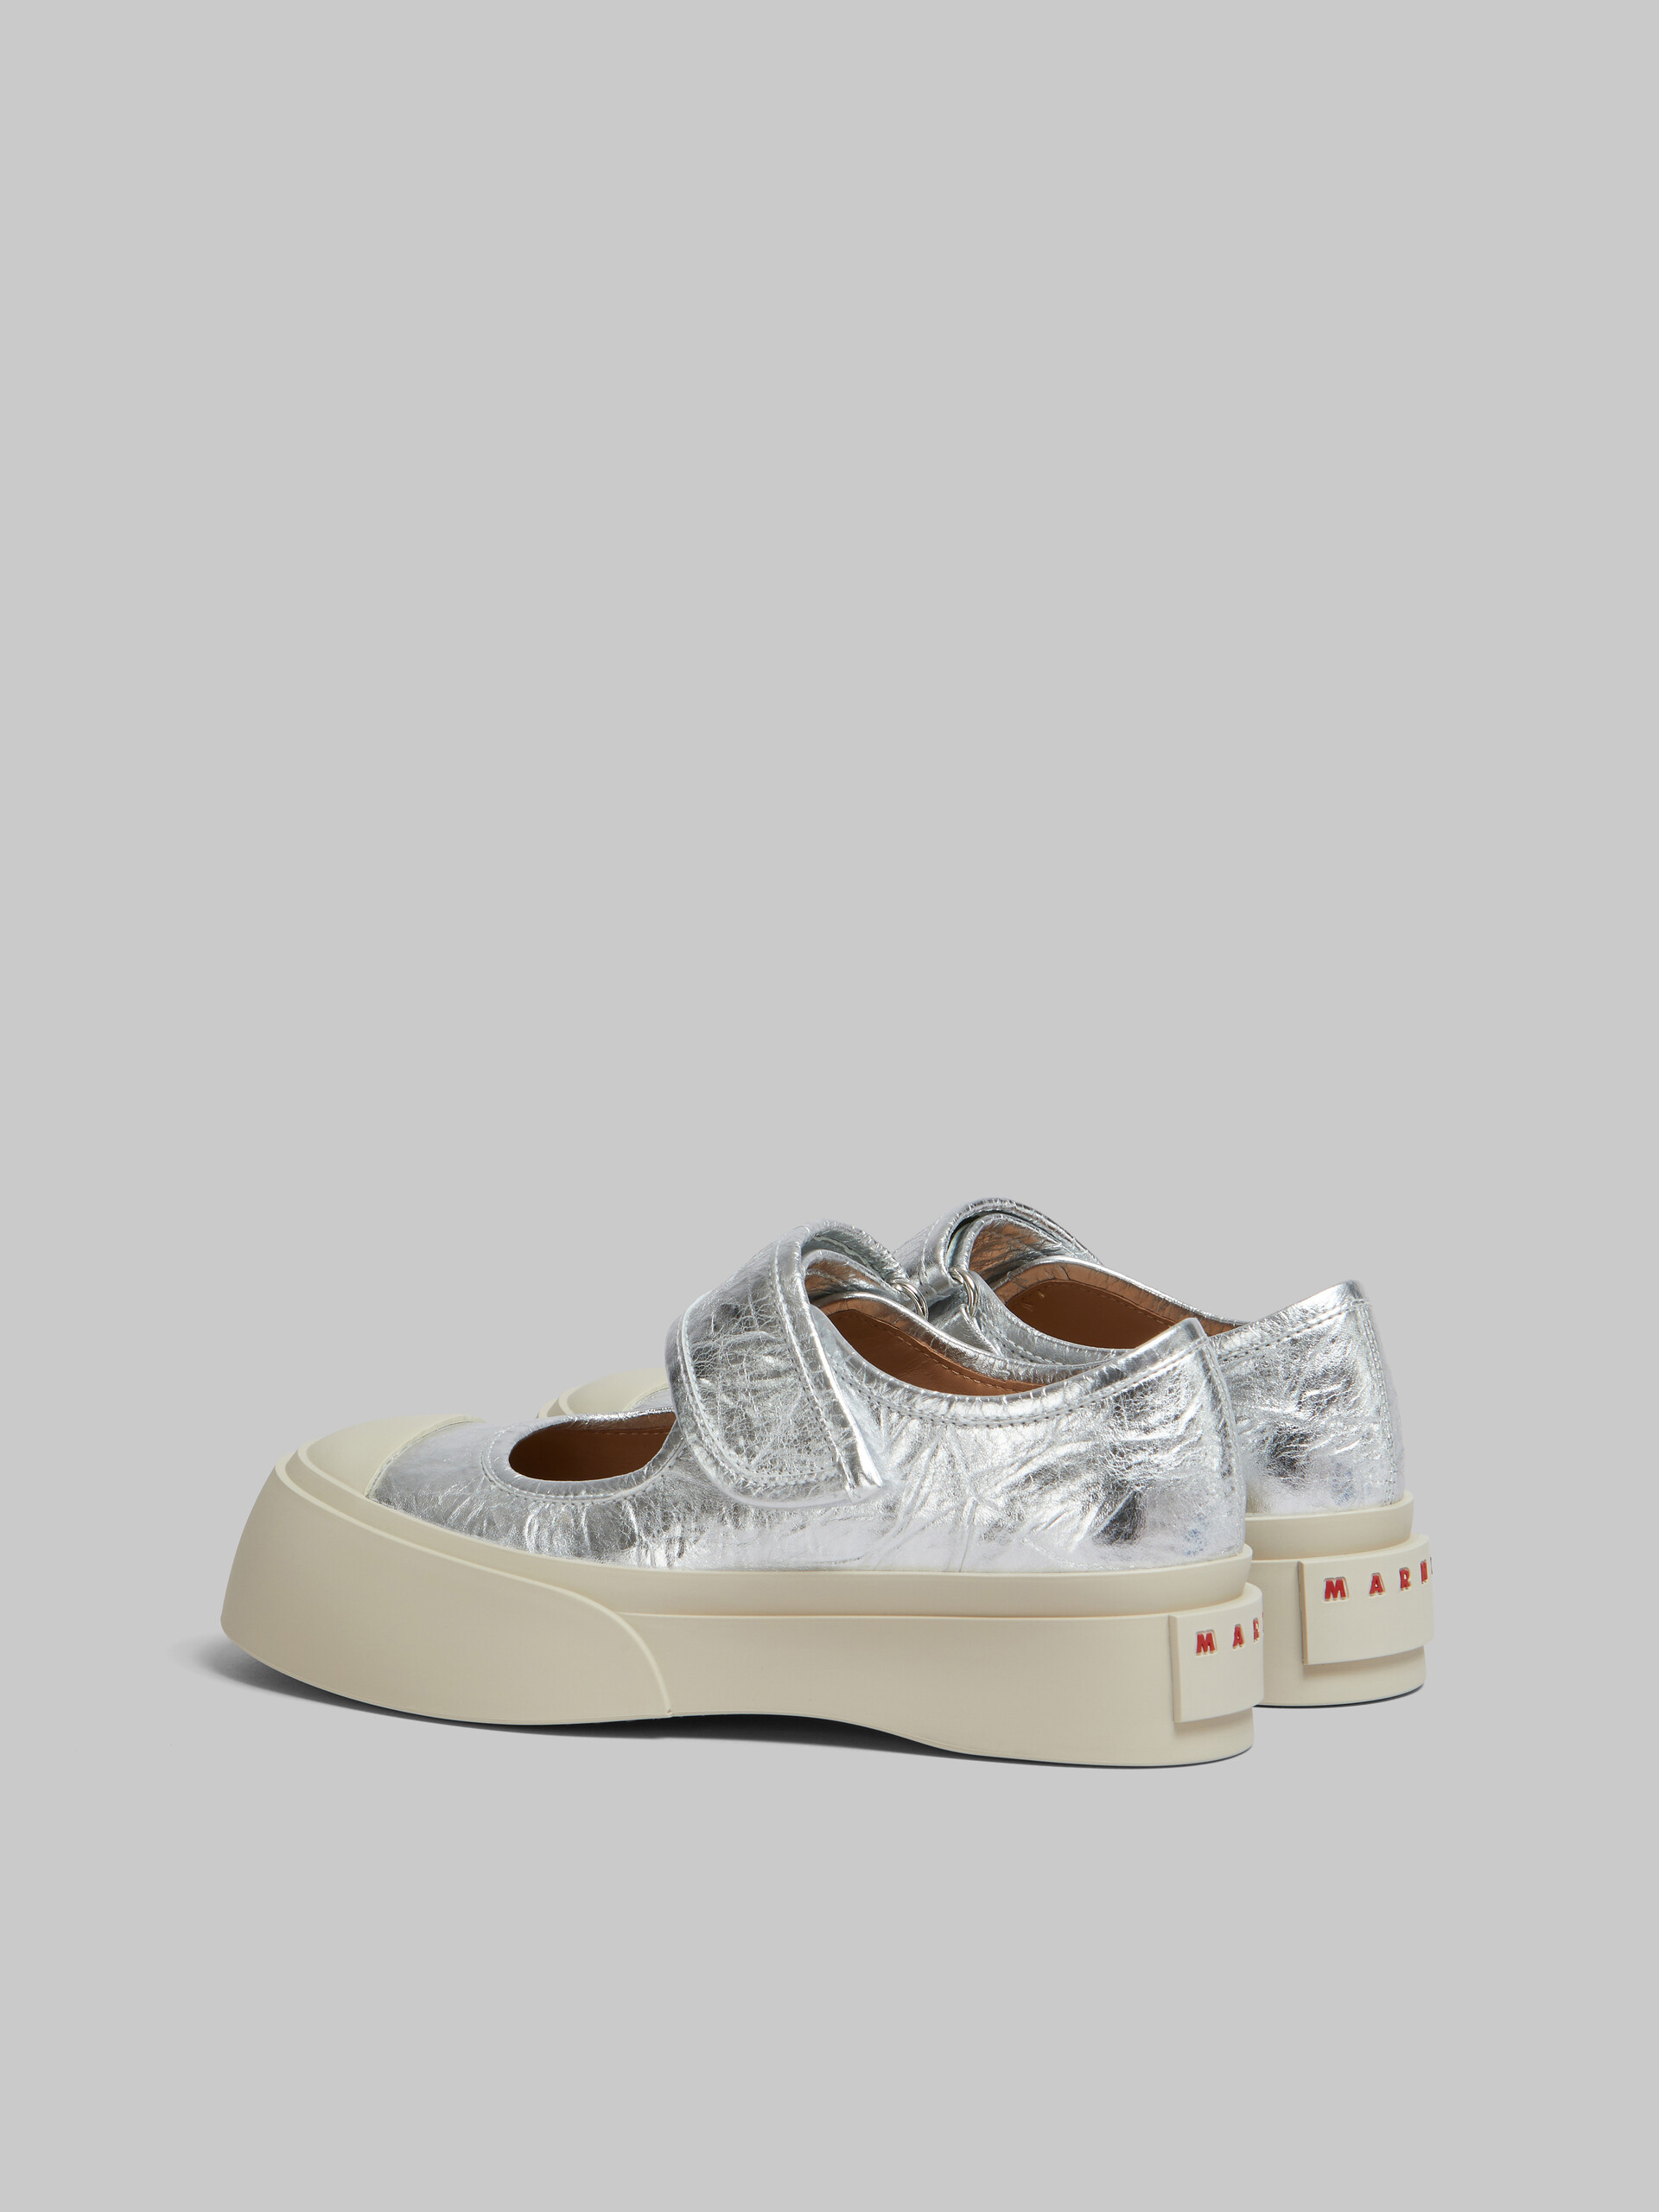 Sneaker Mary Jane in pelle color argento - Sneakers - Image 3